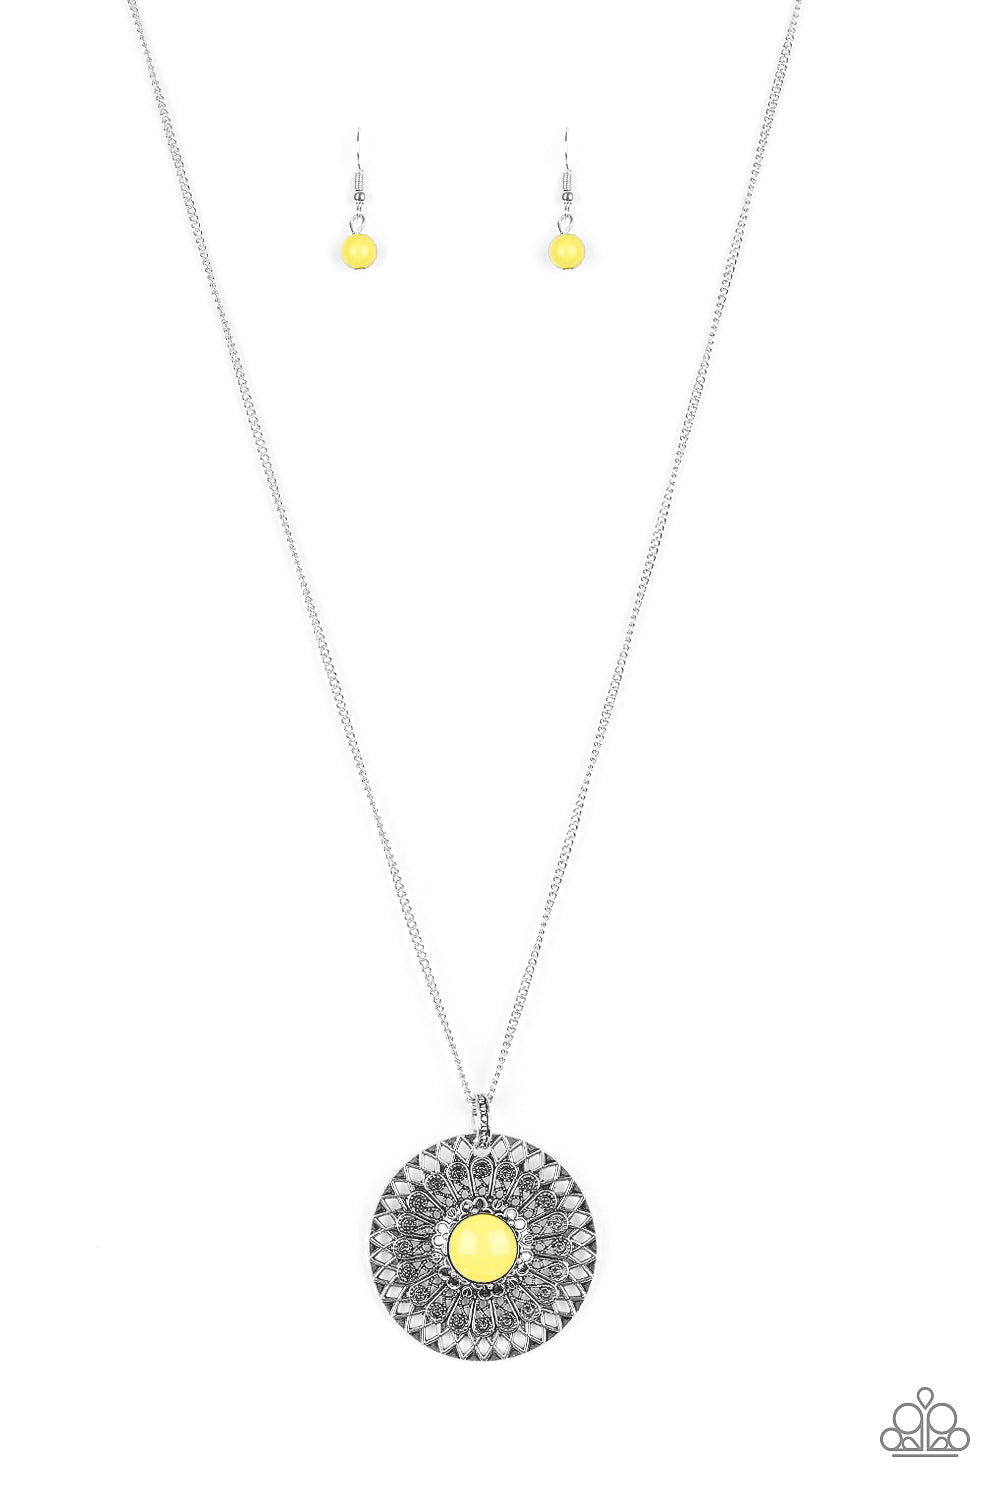 So Solar - Yellow and Silver Necklace - Paparazzi Accessories - A vibrant yellow bead is pressed into the center of a silver medallion radiating with ornate sunburst textures for a whimsical look.